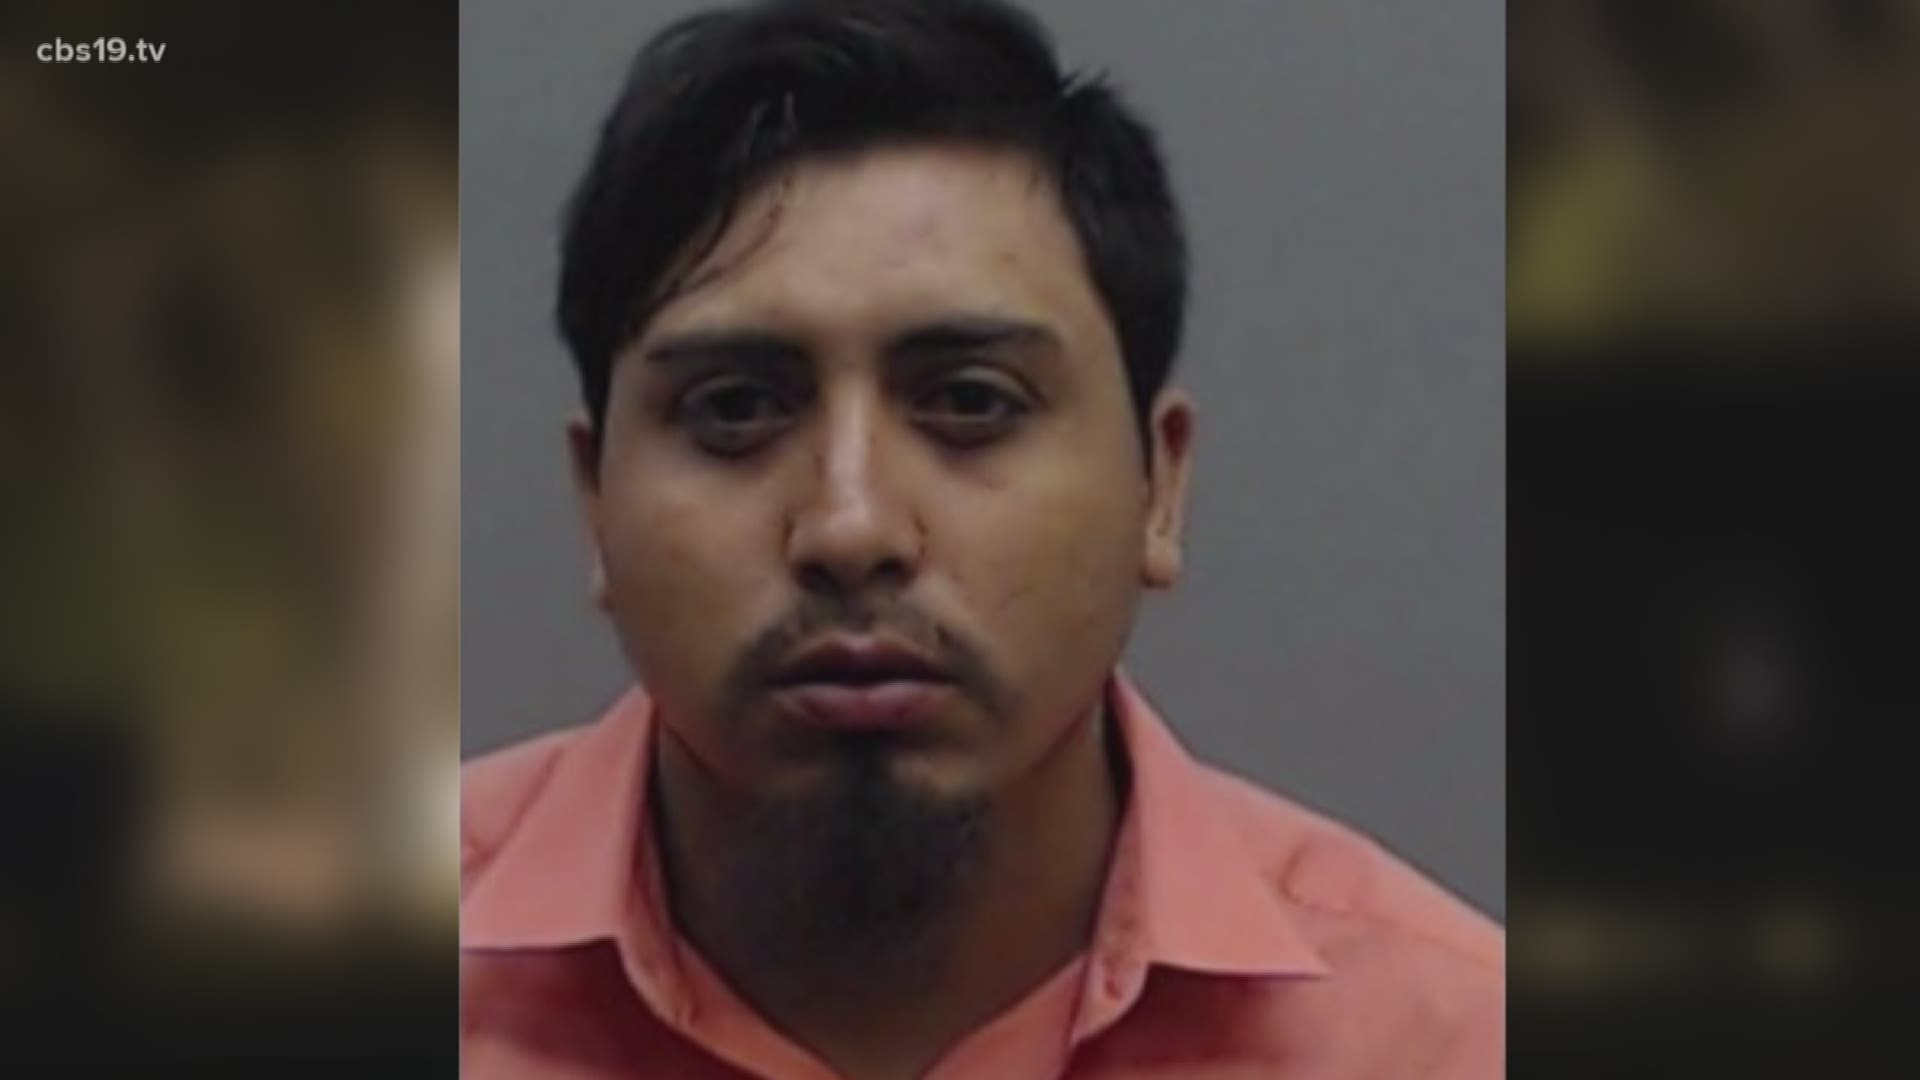 Authorities arrested Gustavo Zavala-Gardia for the murder of his niece in November 2016. Nearly two years later, he will spend the rest of his life in prison.